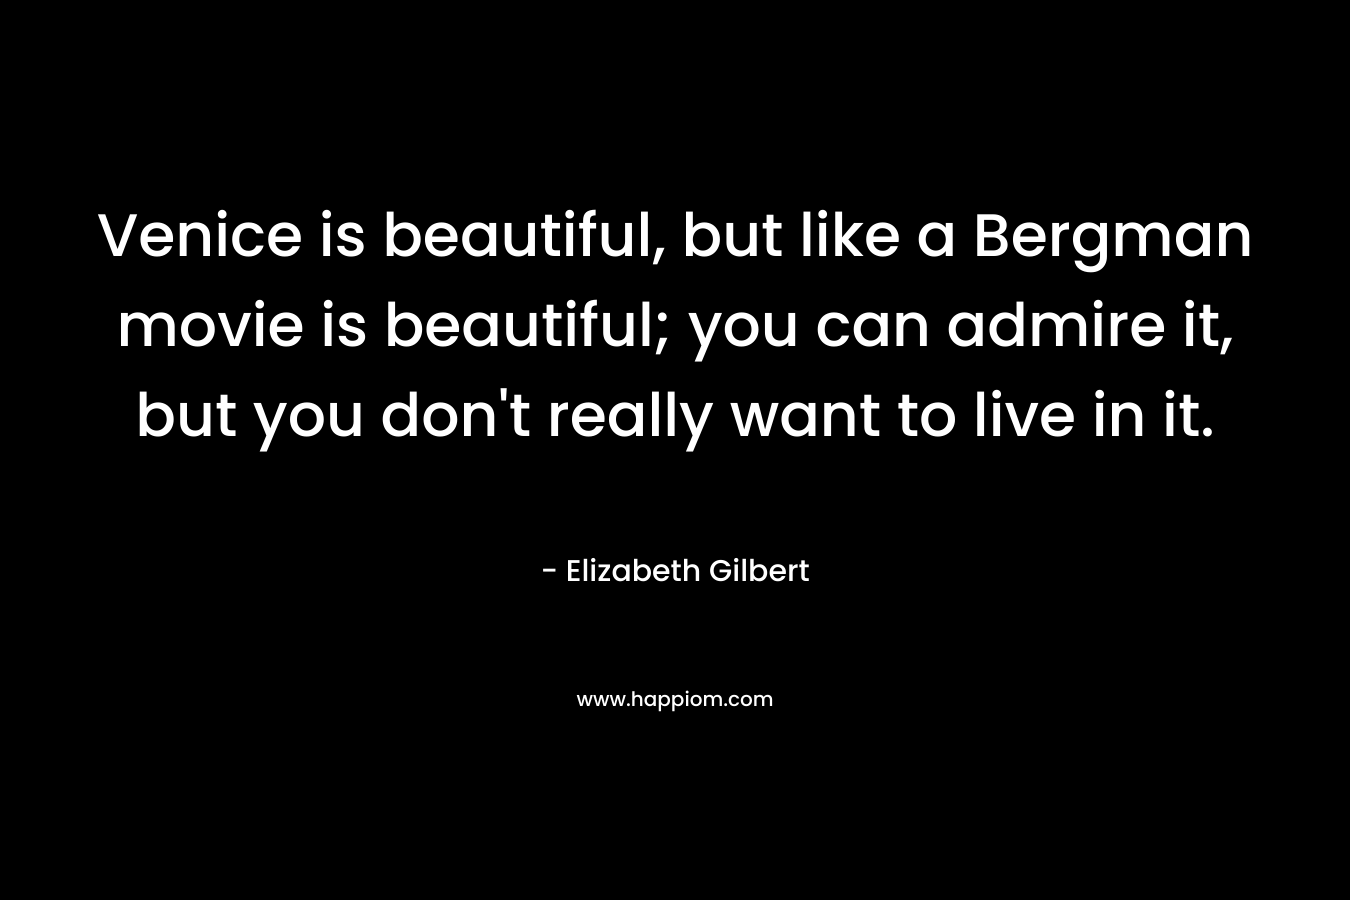 Venice is beautiful, but like a Bergman movie is beautiful; you can admire it, but you don't really want to live in it.